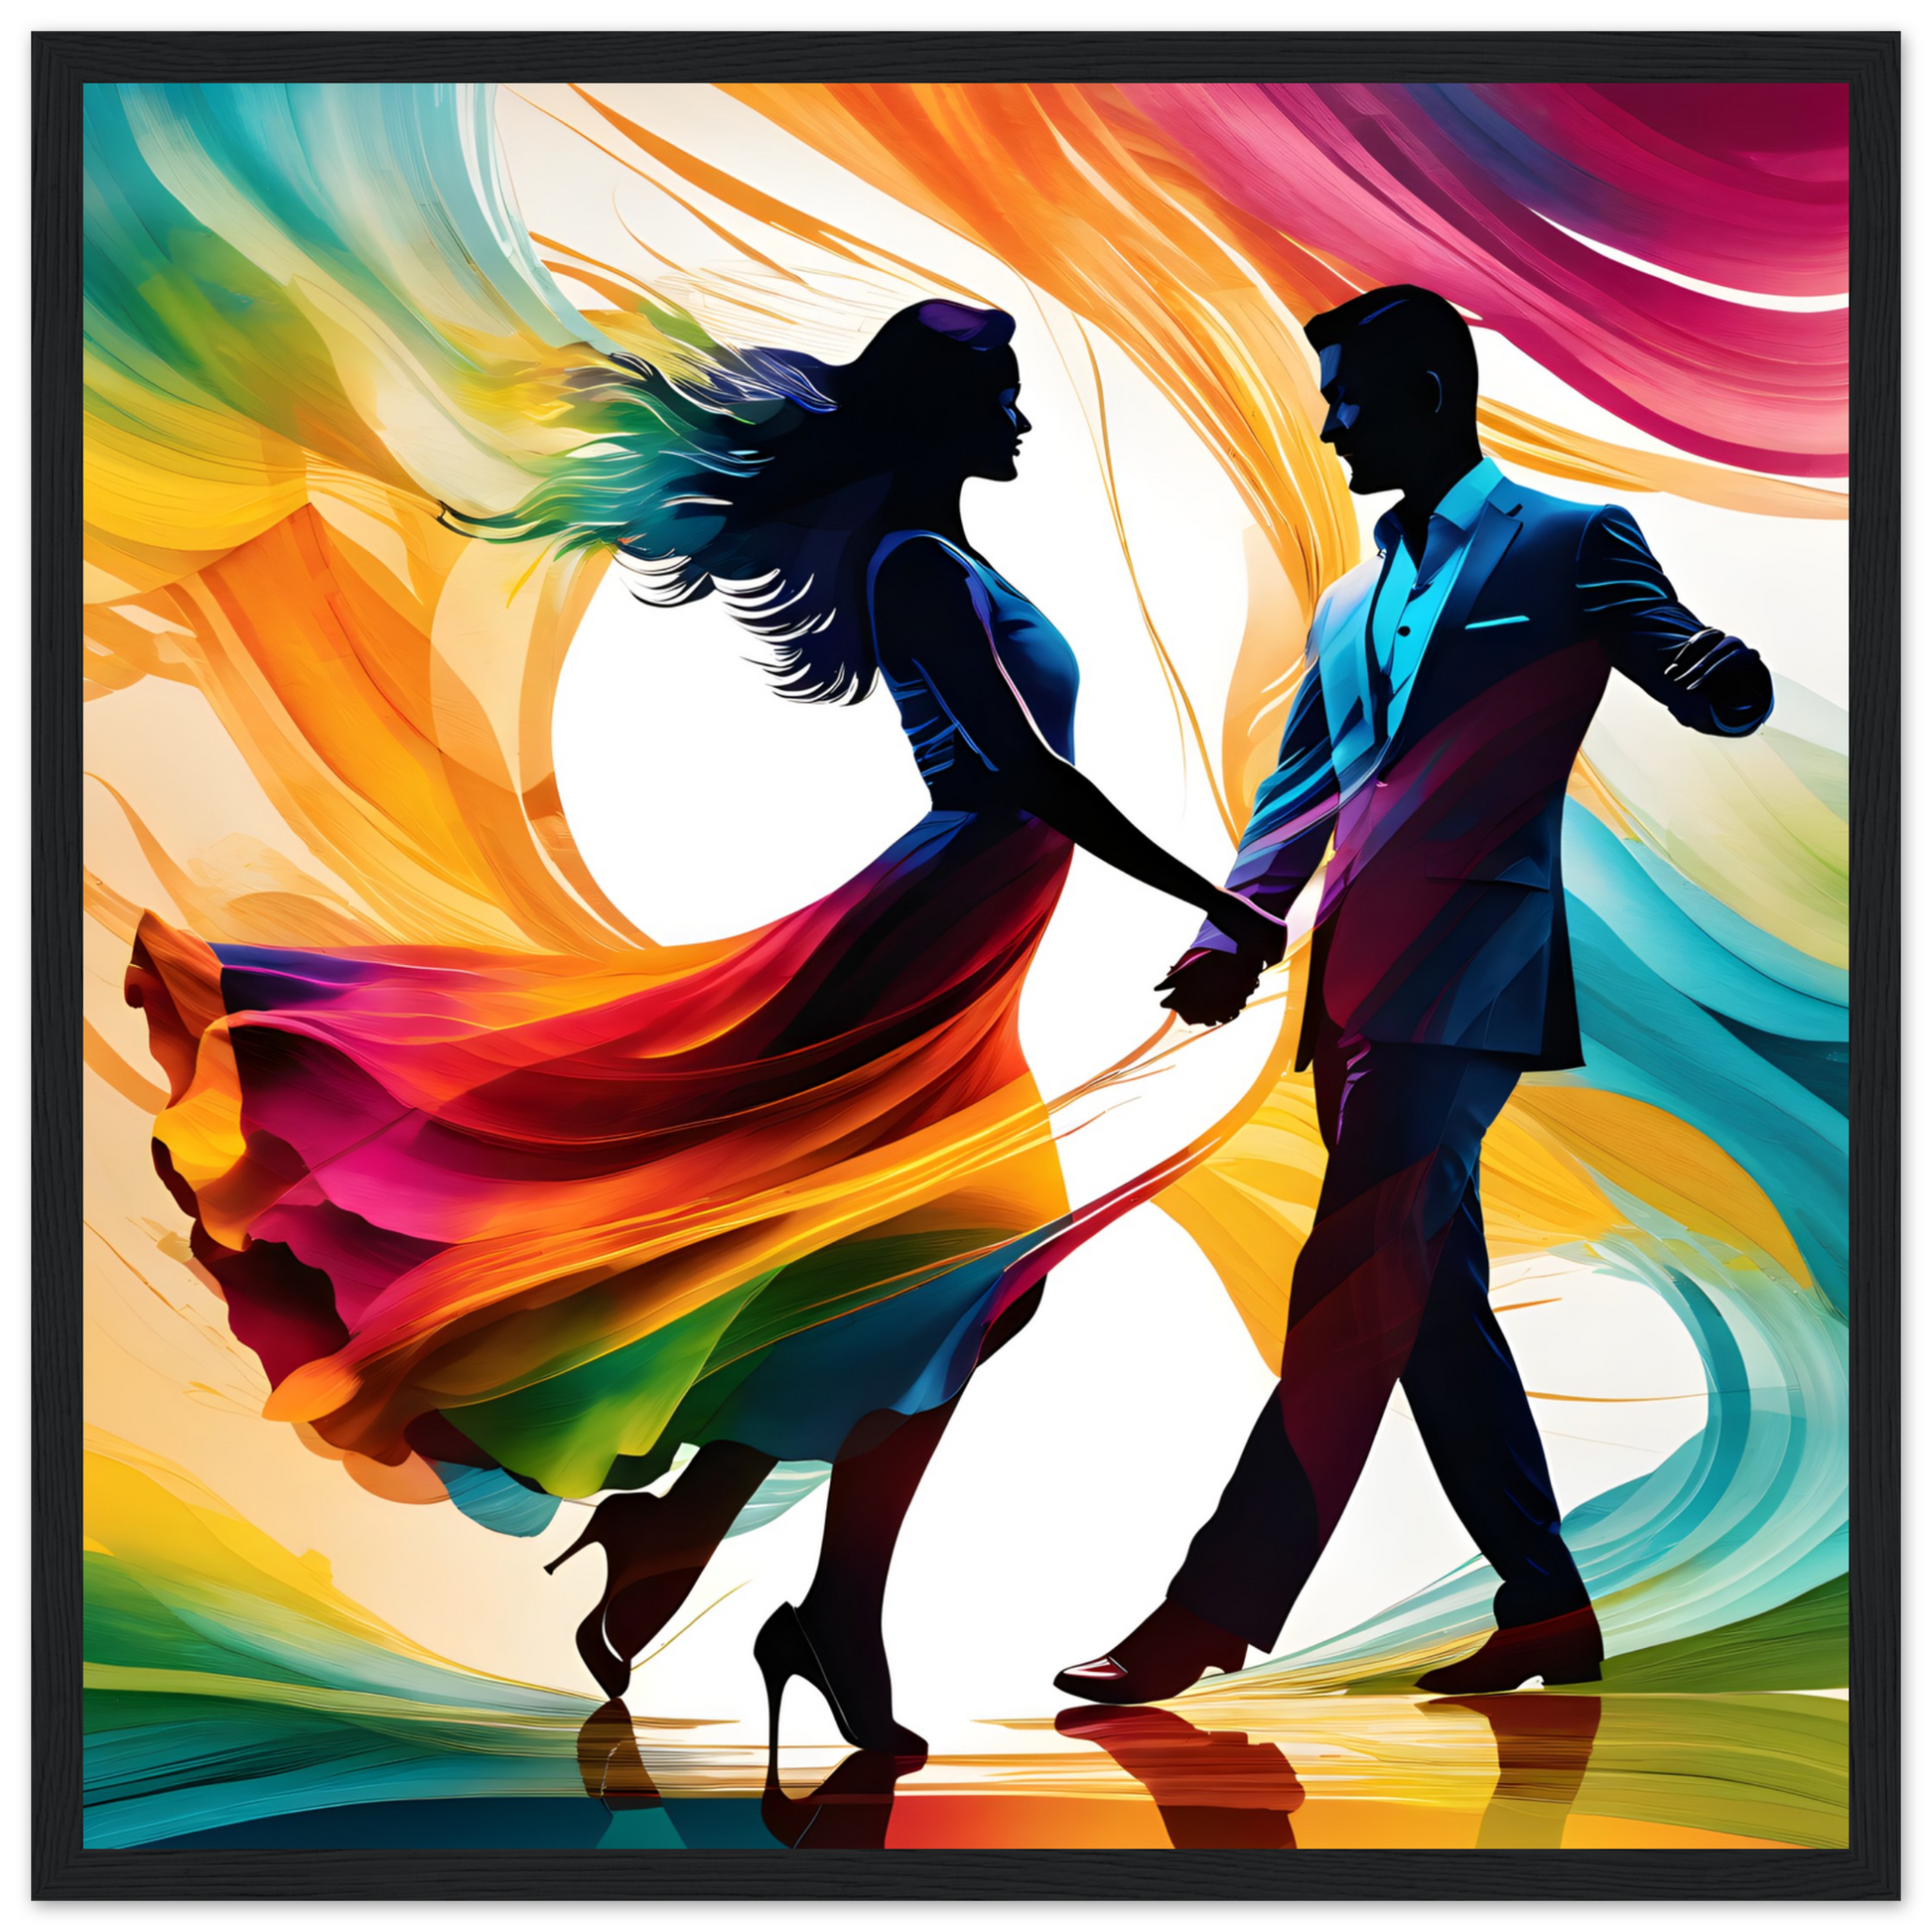 Swirlls of colour in this picture of a couple coming together for there dance.